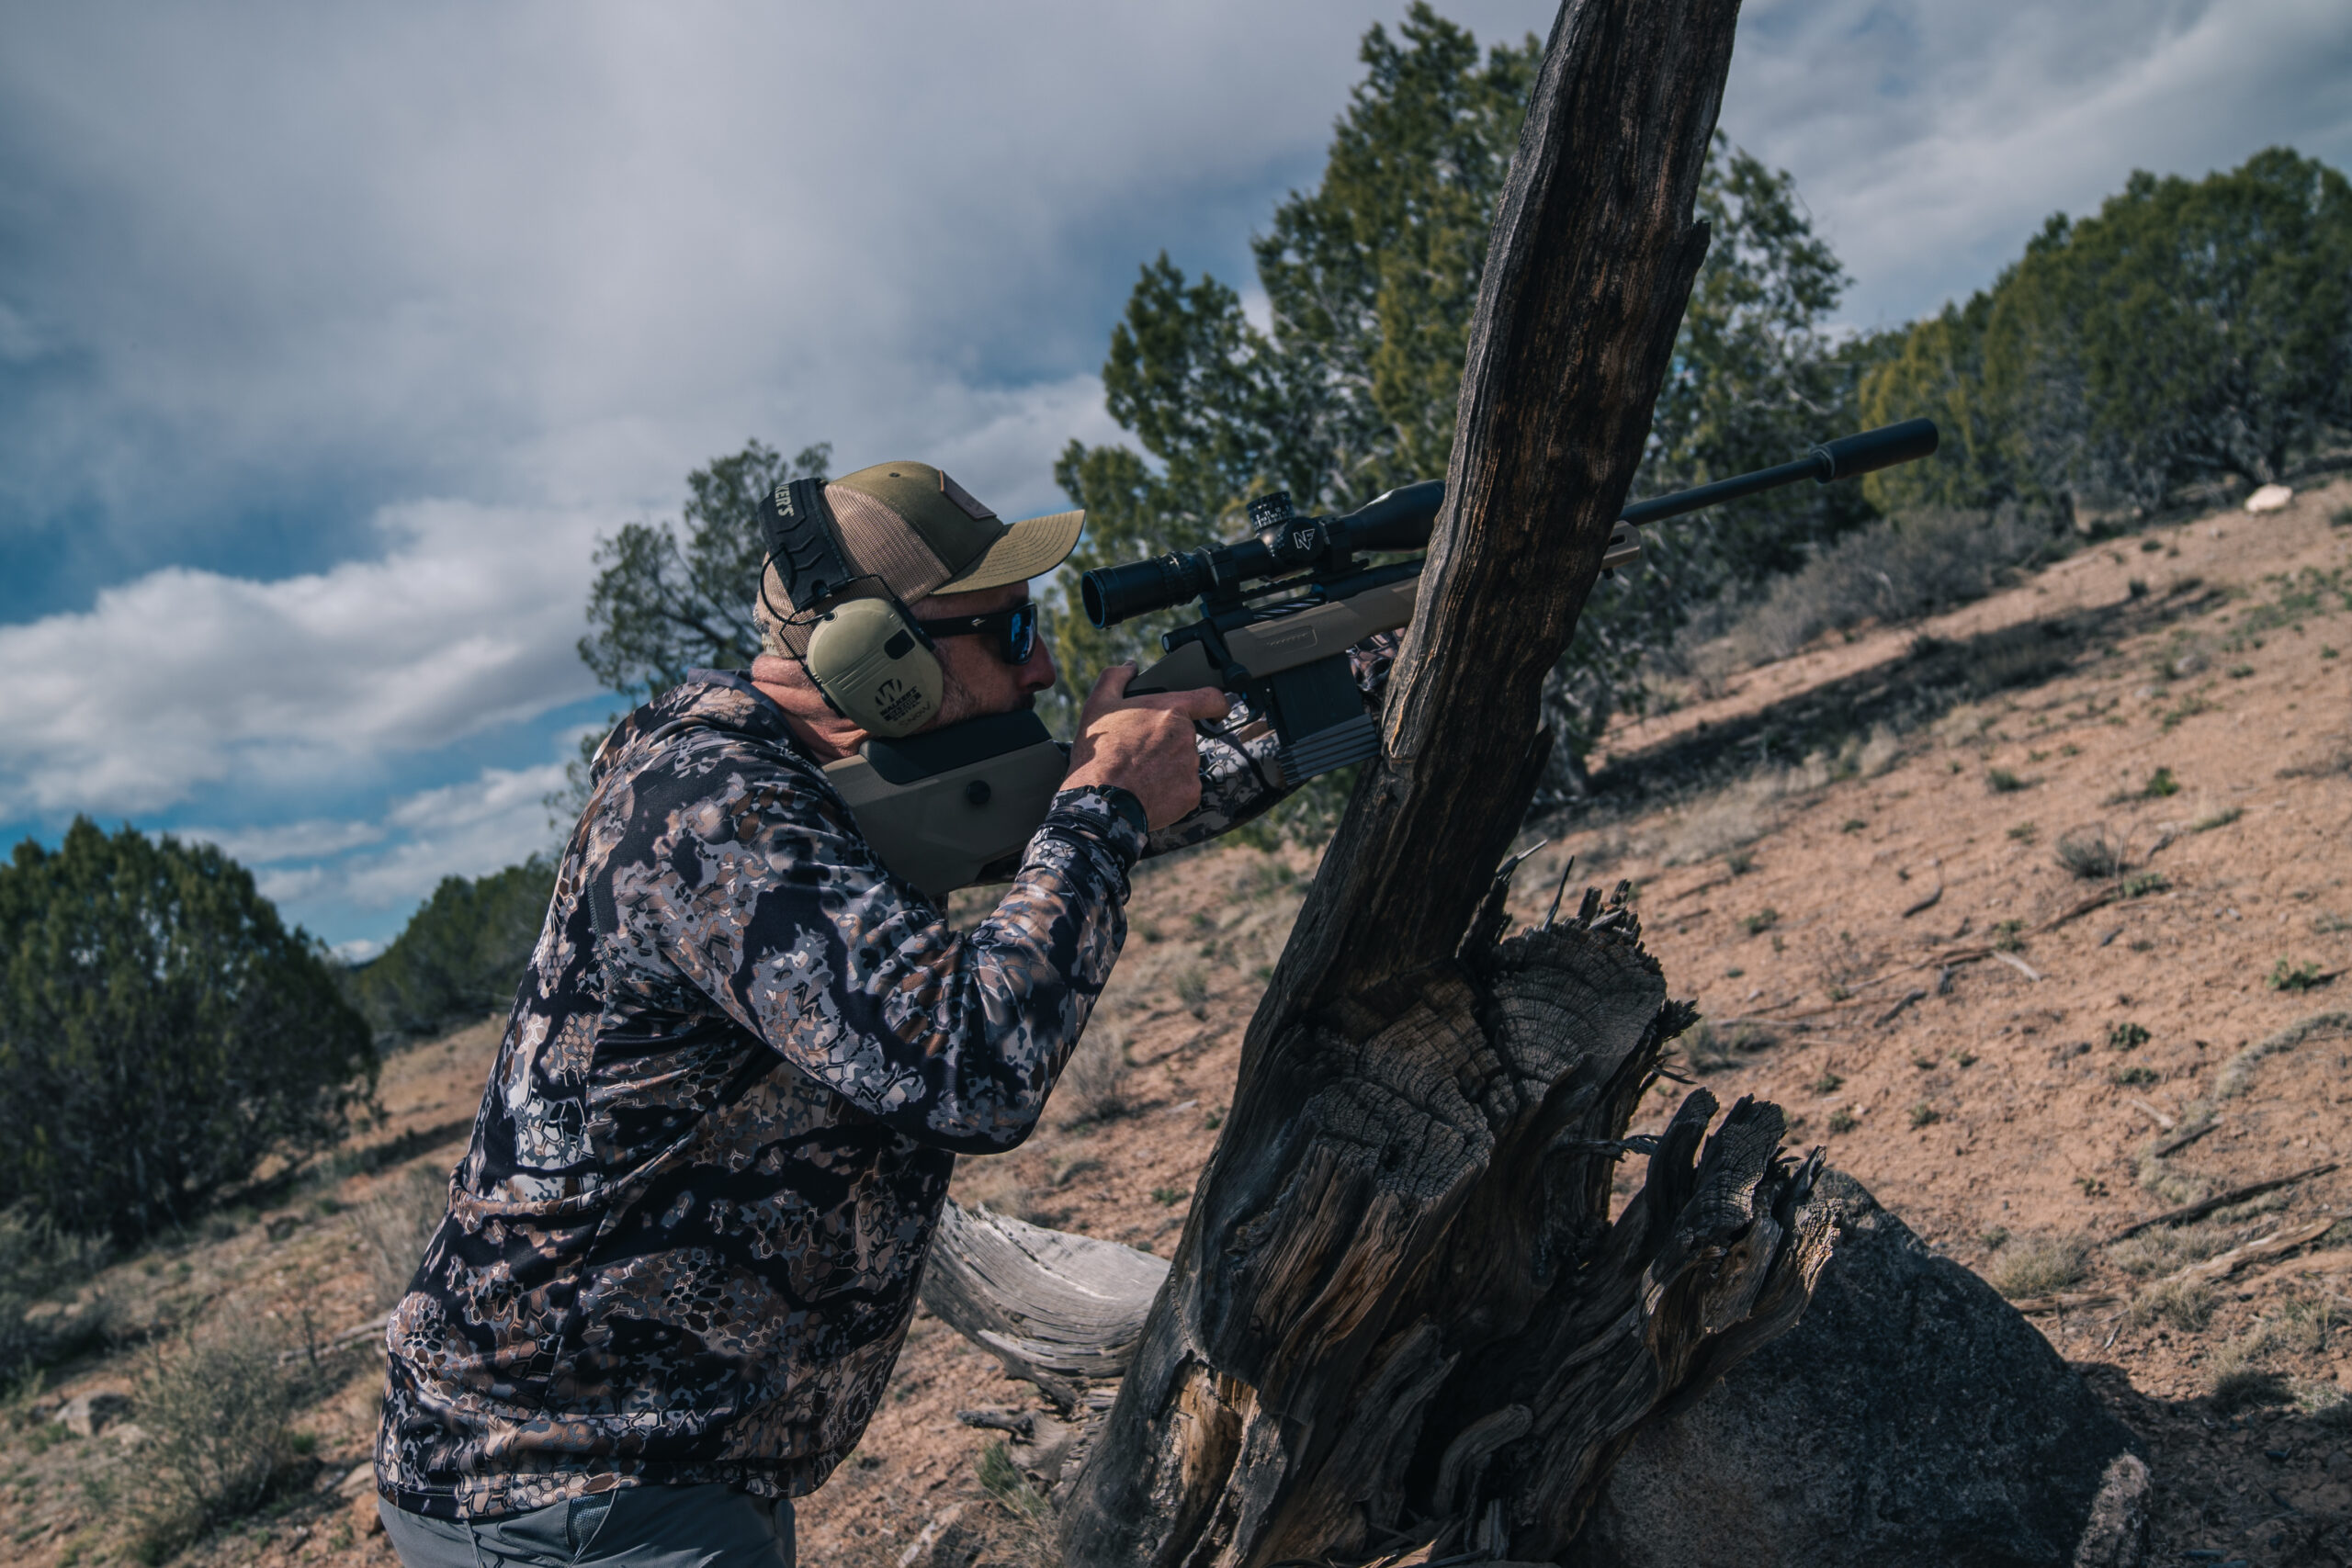 The author shoots the Mossberg Patriot LR.